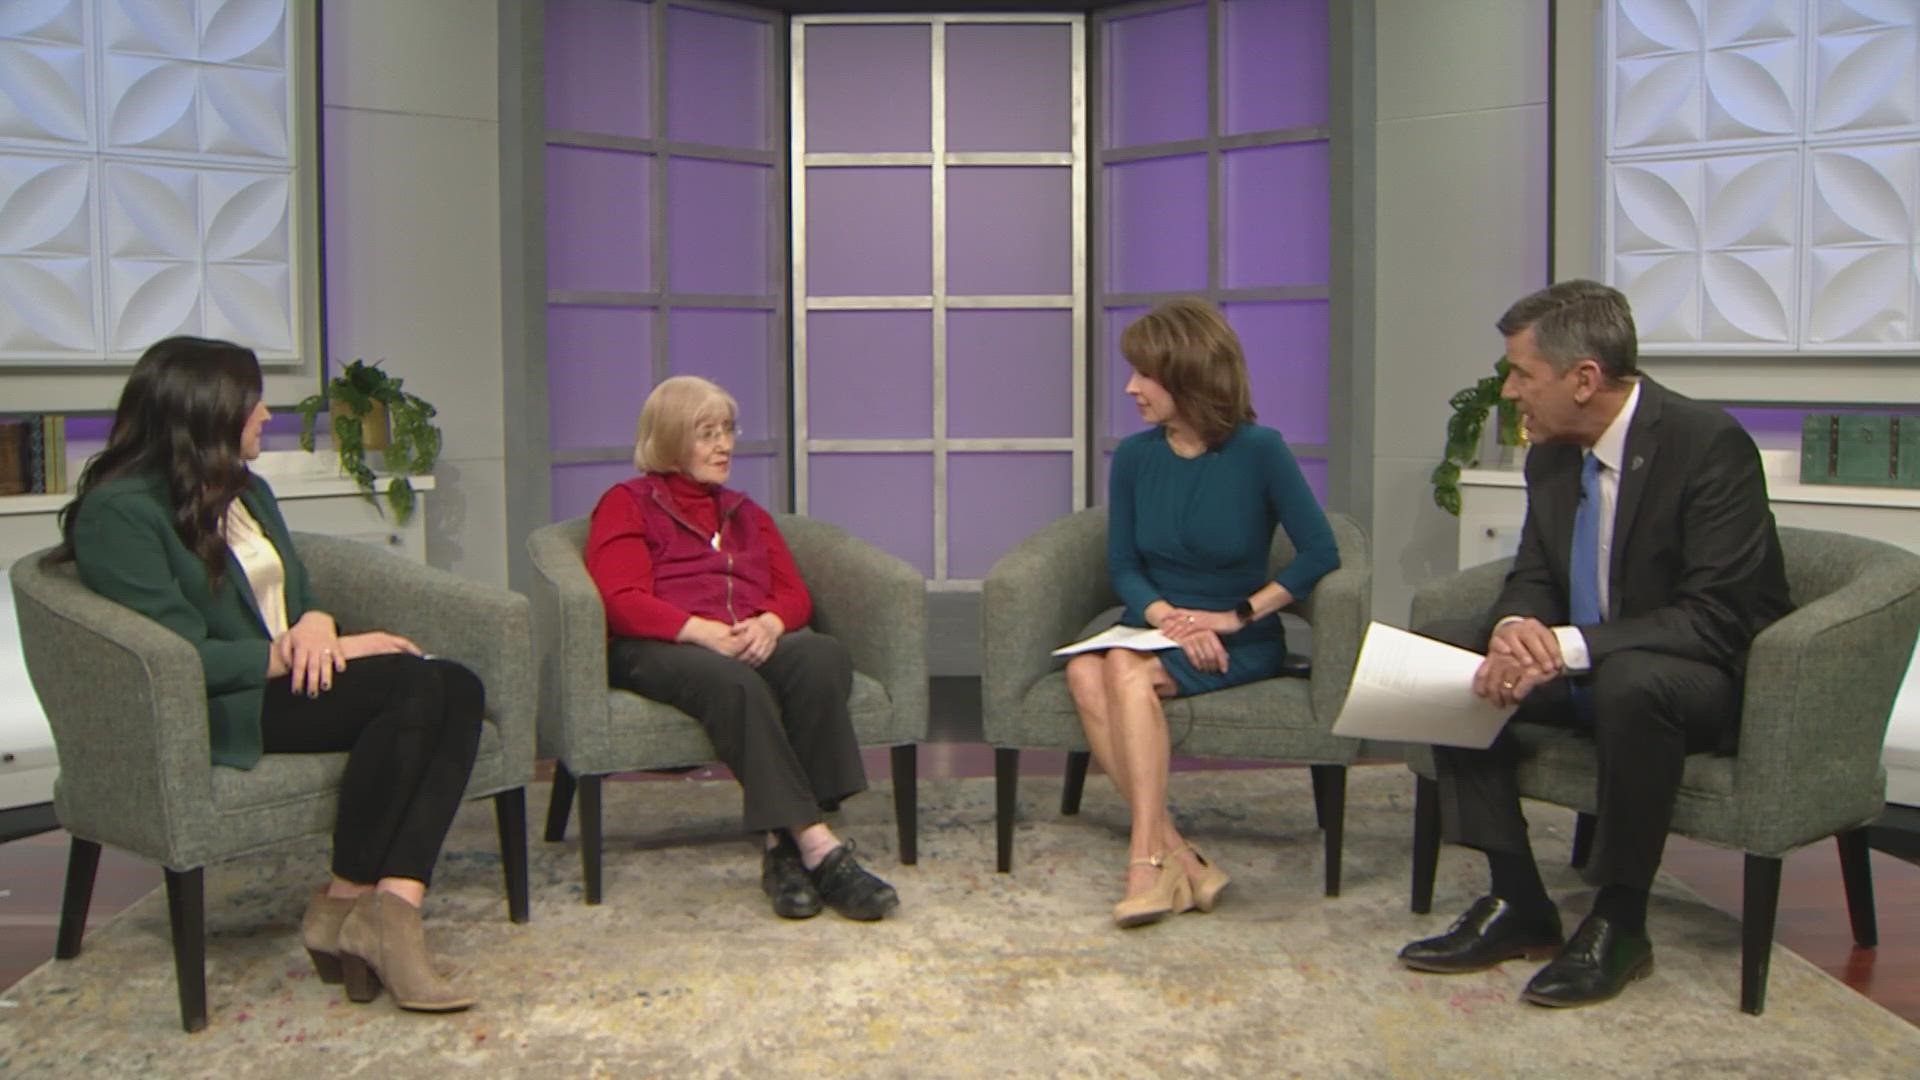 We speak with Becci Jacobs from the Mizel Museum and Sara Moses, a Holocaust survivor.